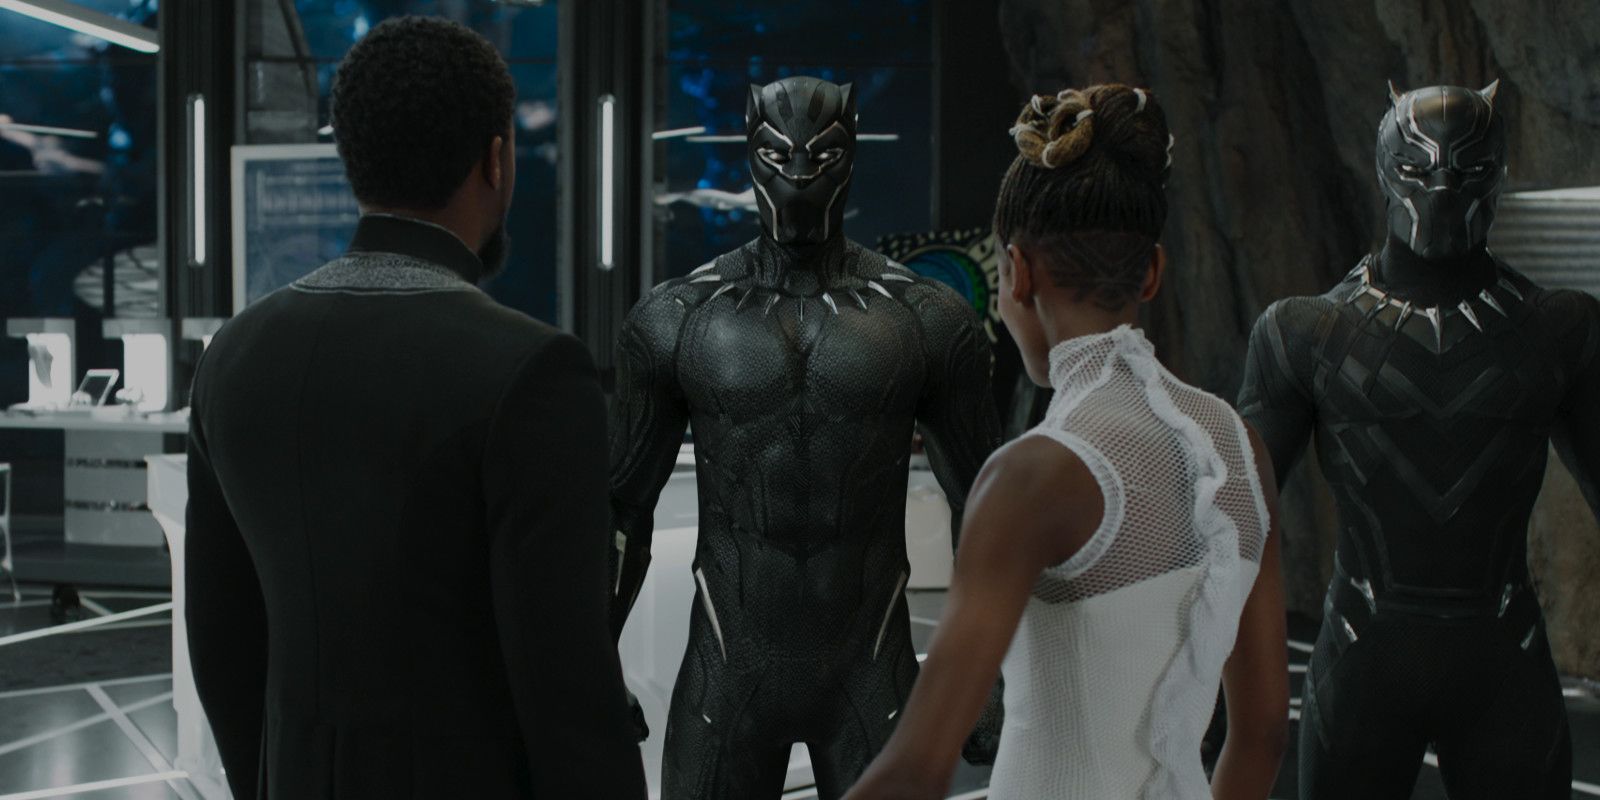 Every Piece Of Black Panther’s Armor And Tech Explained